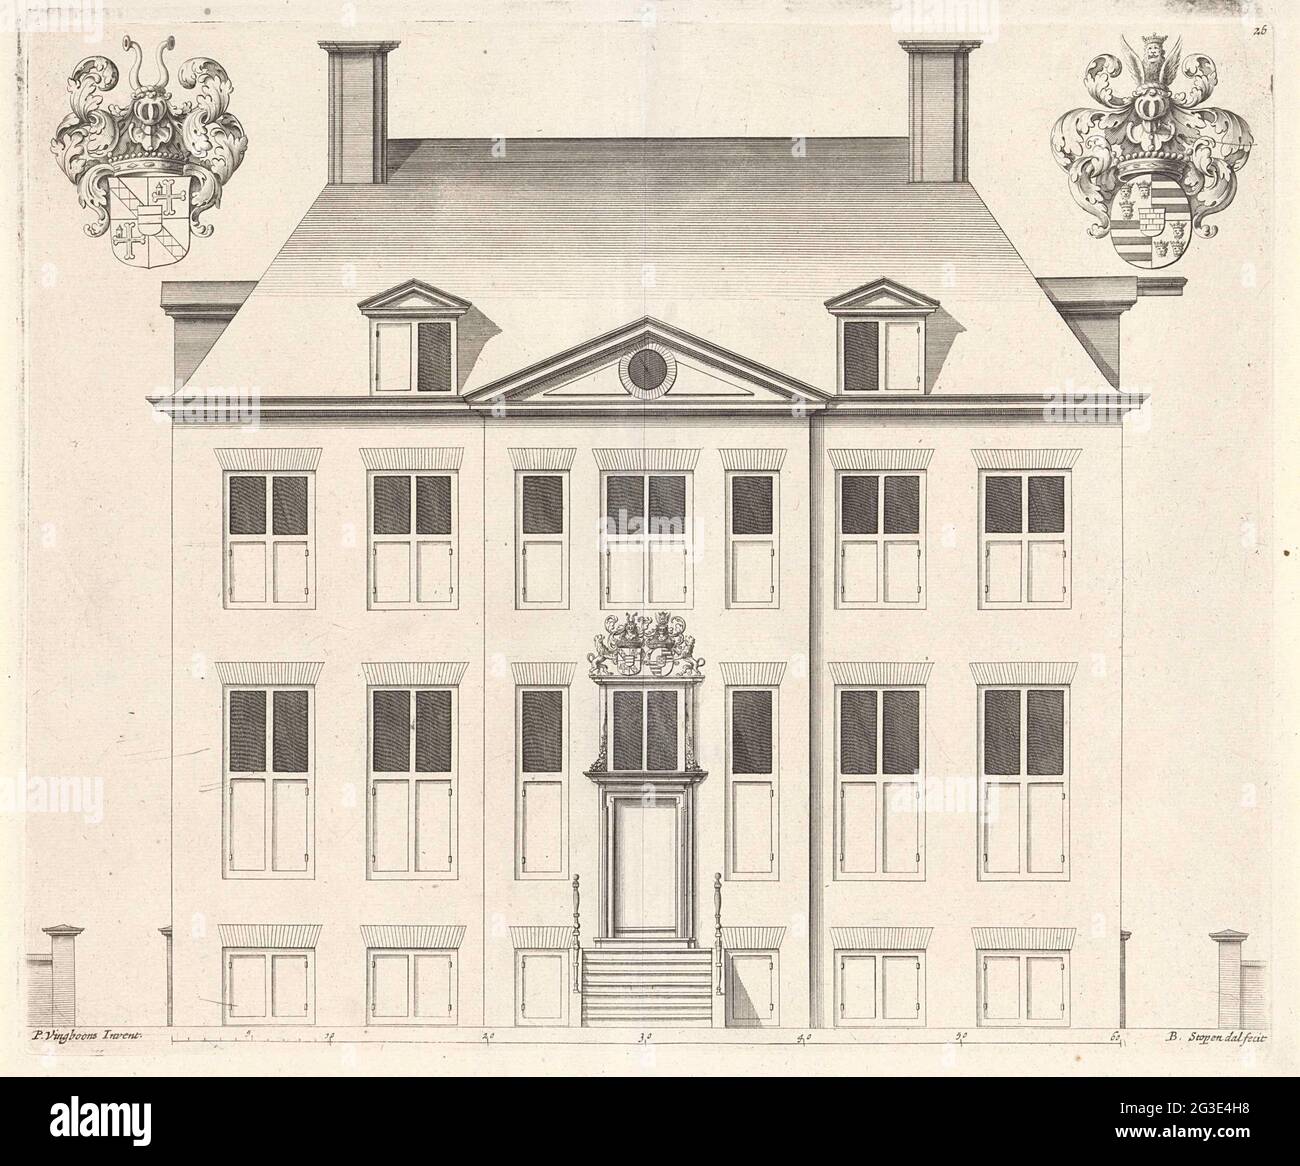 Facade of House Vanenburg at Putten. Facade of House Vanenburg near Putten, built on behalf of Hendrik van Essen in 1664. The house was designed by Philips Vingboons. Stock Photo